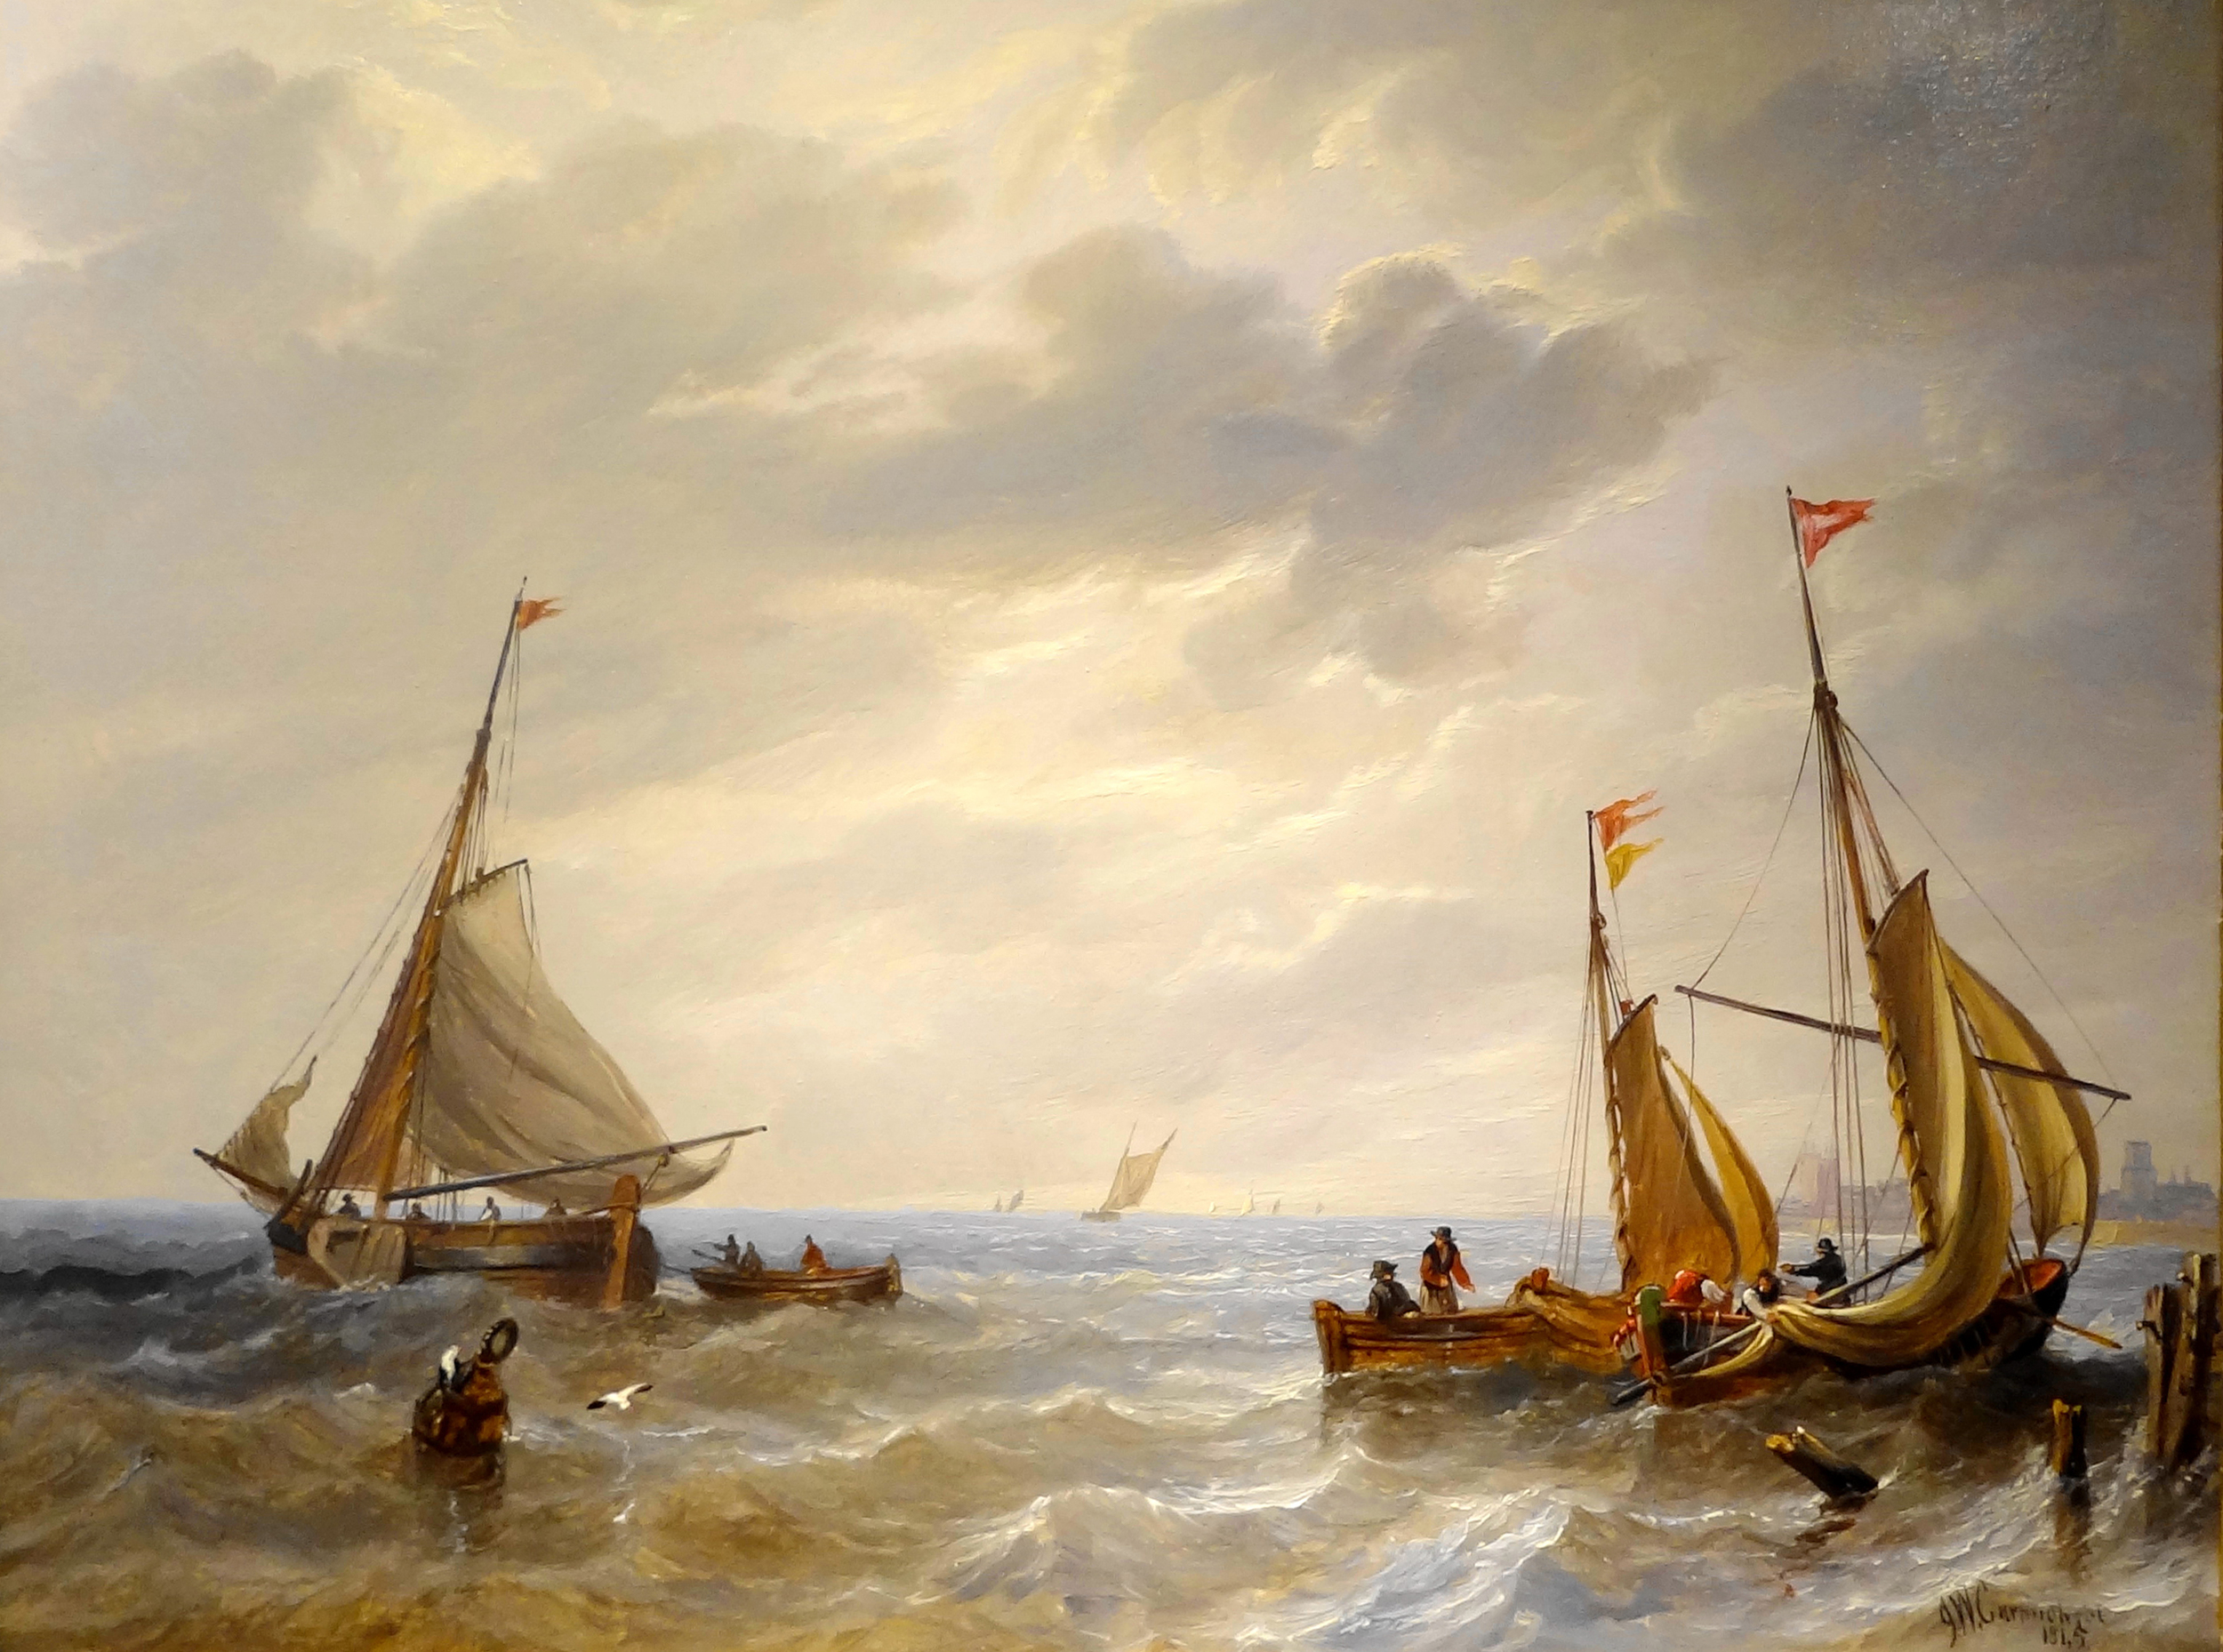 Boats Lowering Sails